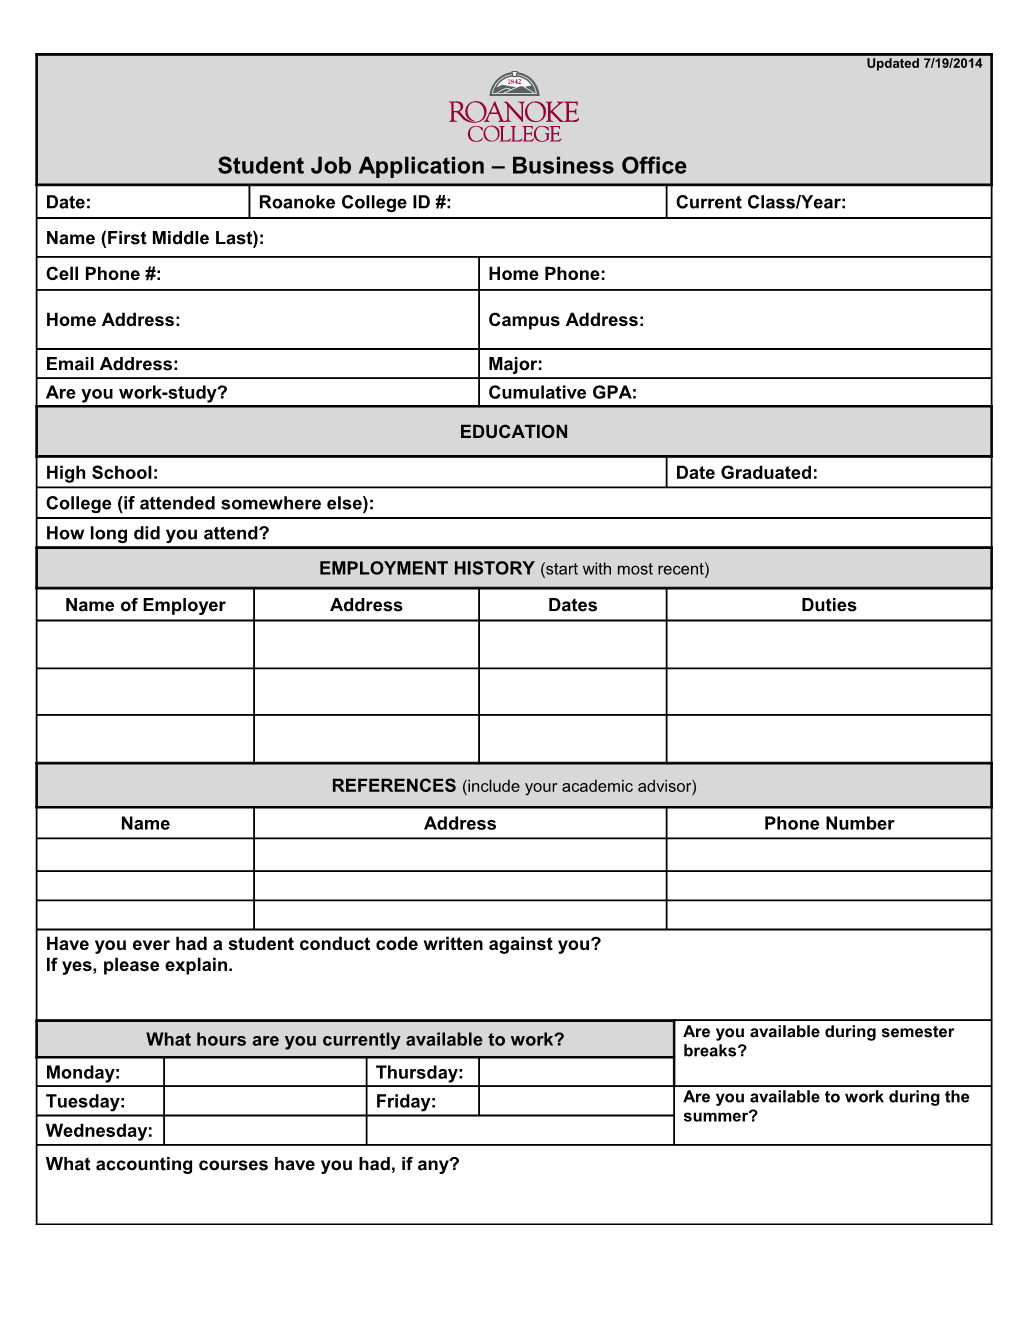 Updated 7/19/2014 Student Job Application Business Office